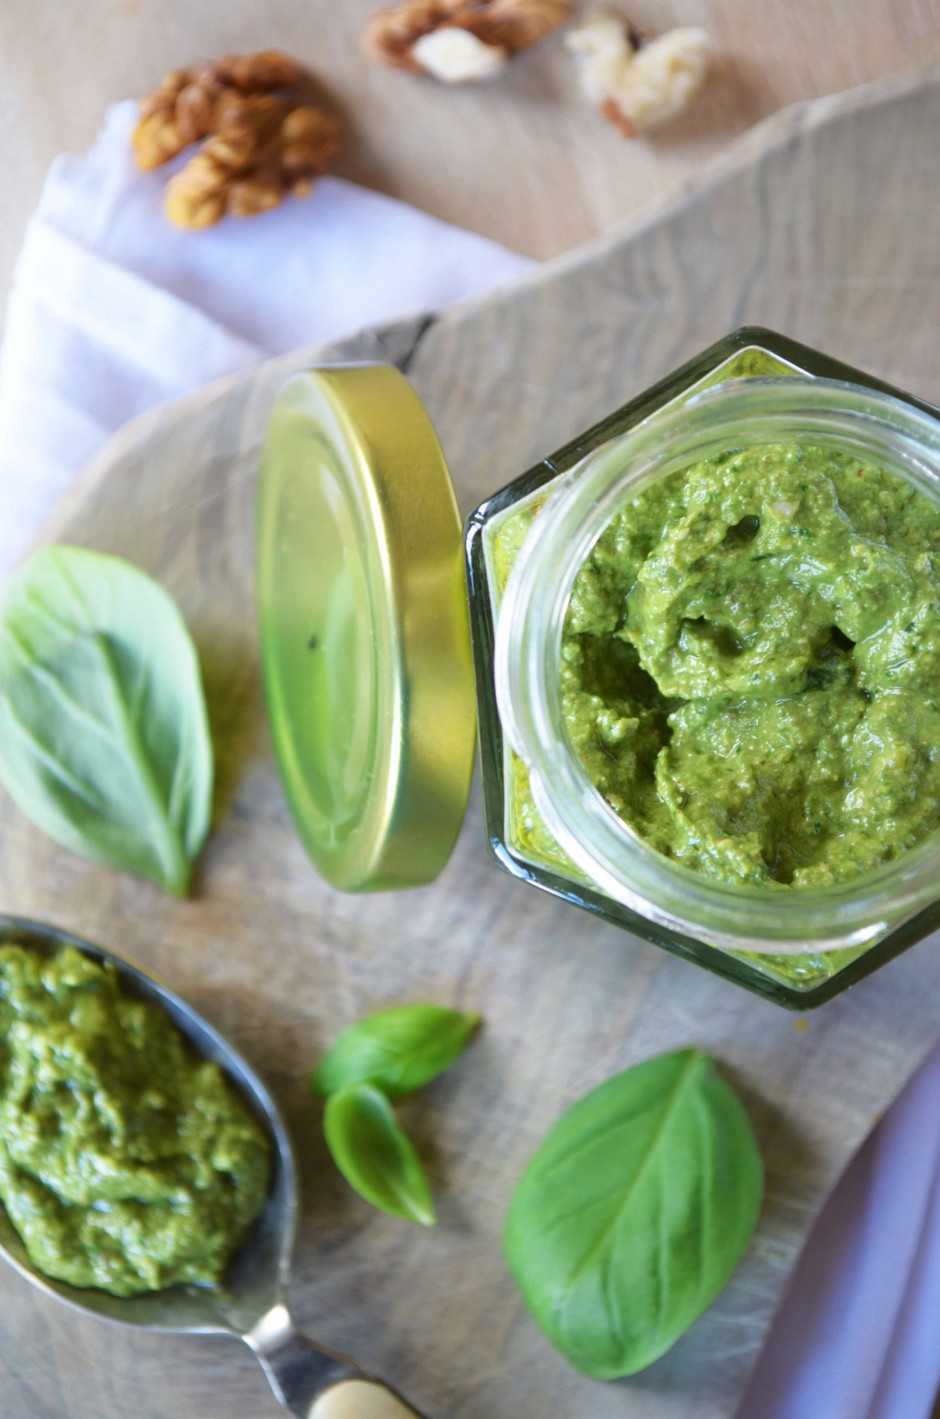 Creamy walnut and basil pesto. Recipe and photo by That Healthy Kitchen